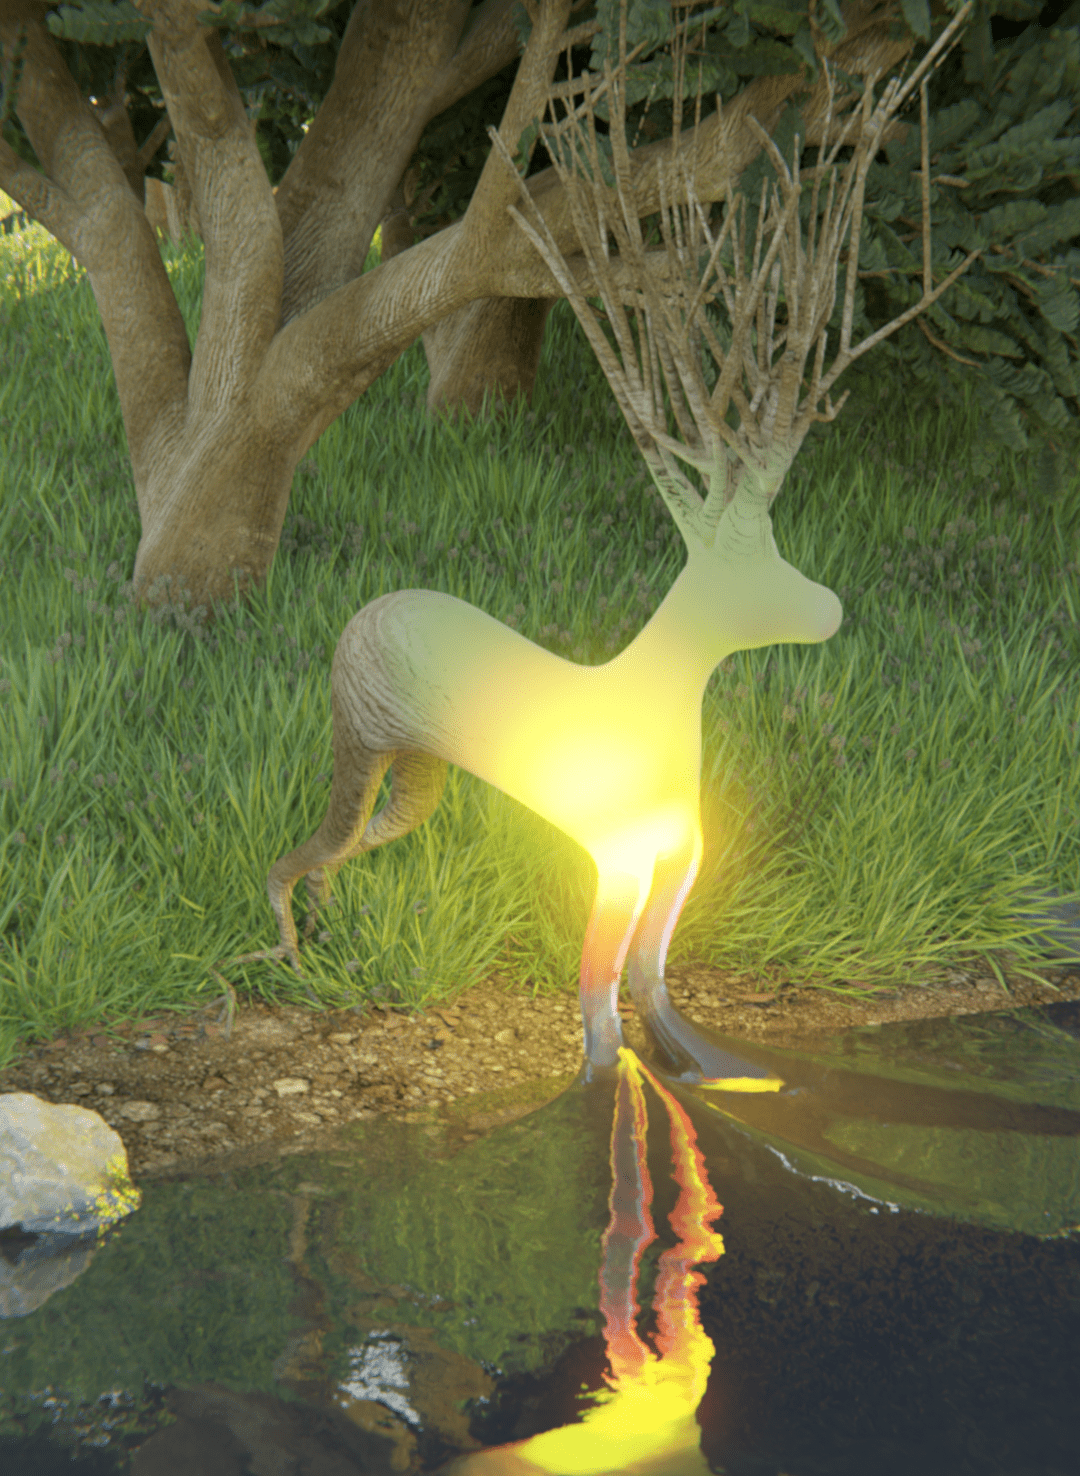 emerging from the surface of the water, a riverside deer-like creature made of water, wood, and light stands proud